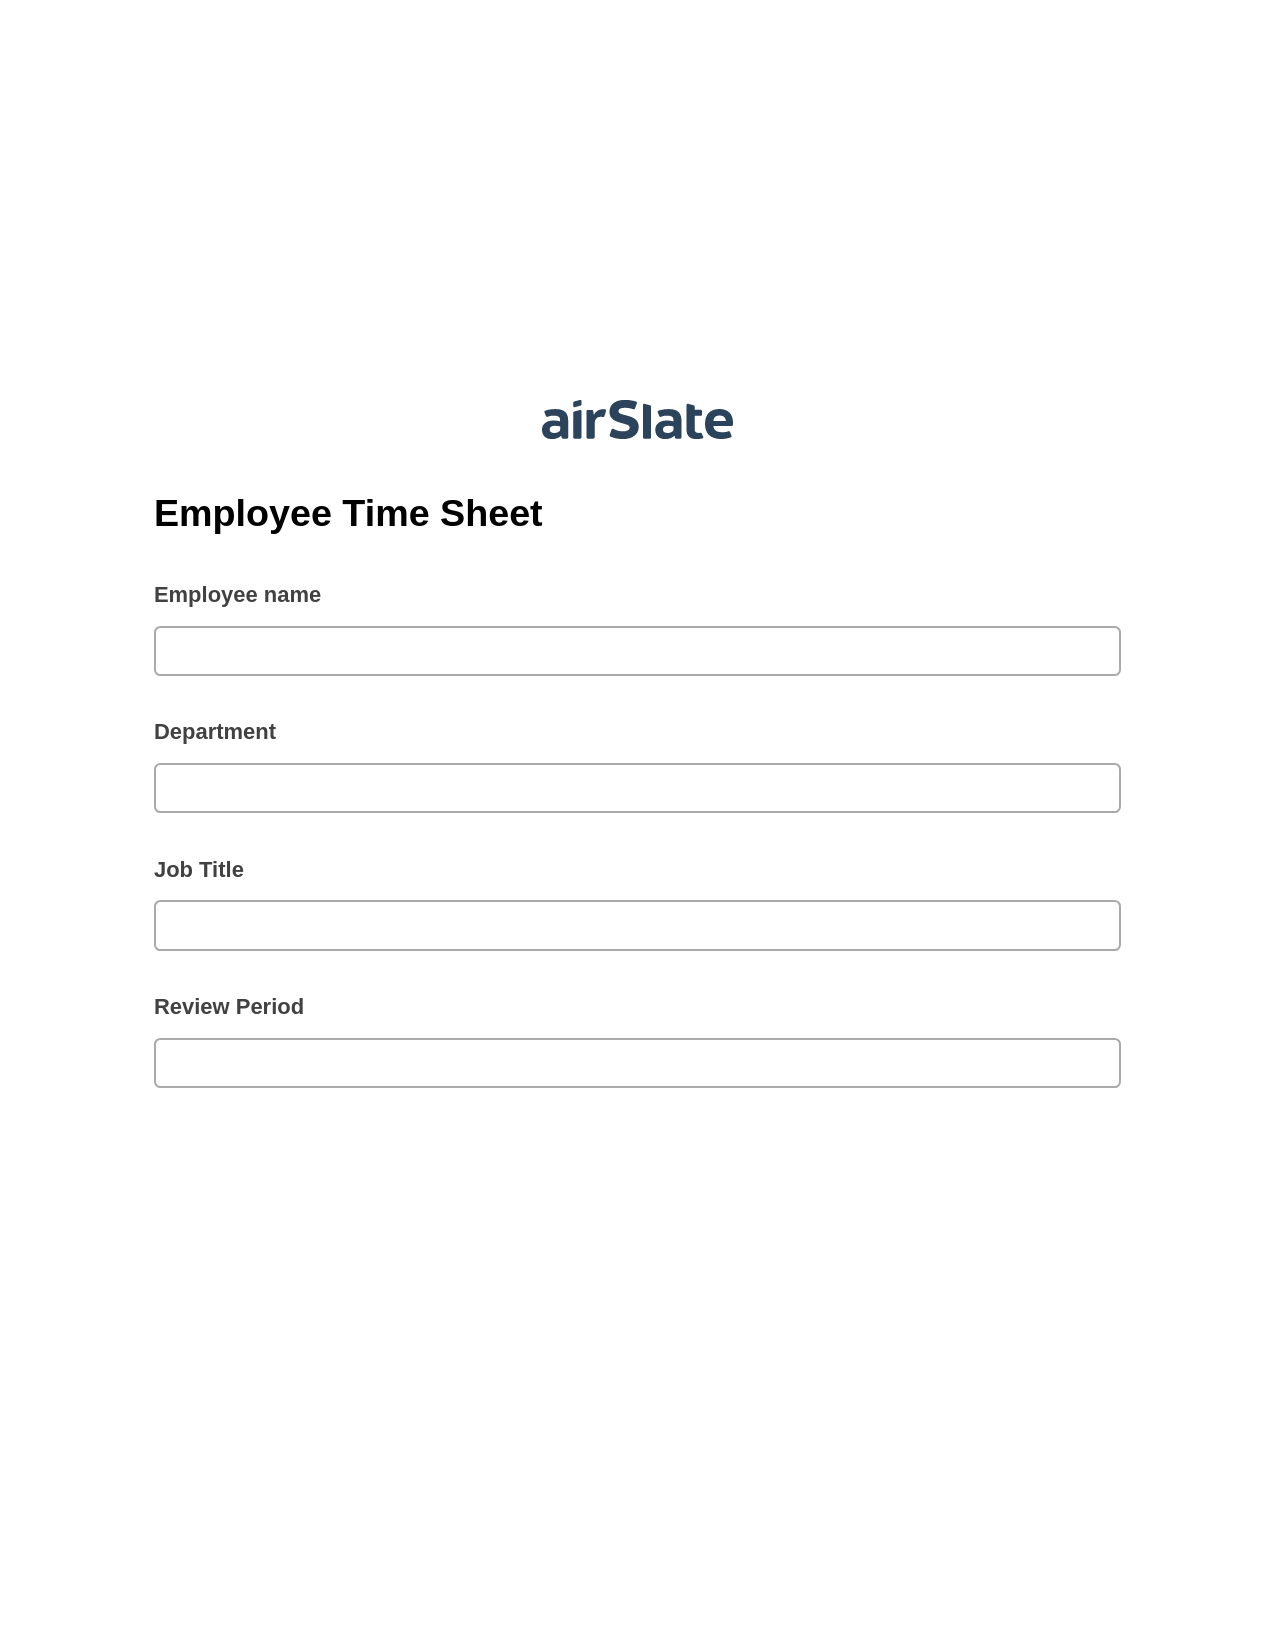 Employee Time Sheet Pre-fill from Salesforce Records with SOQL Bot, Create slate addon, Archive to Google Drive Bot